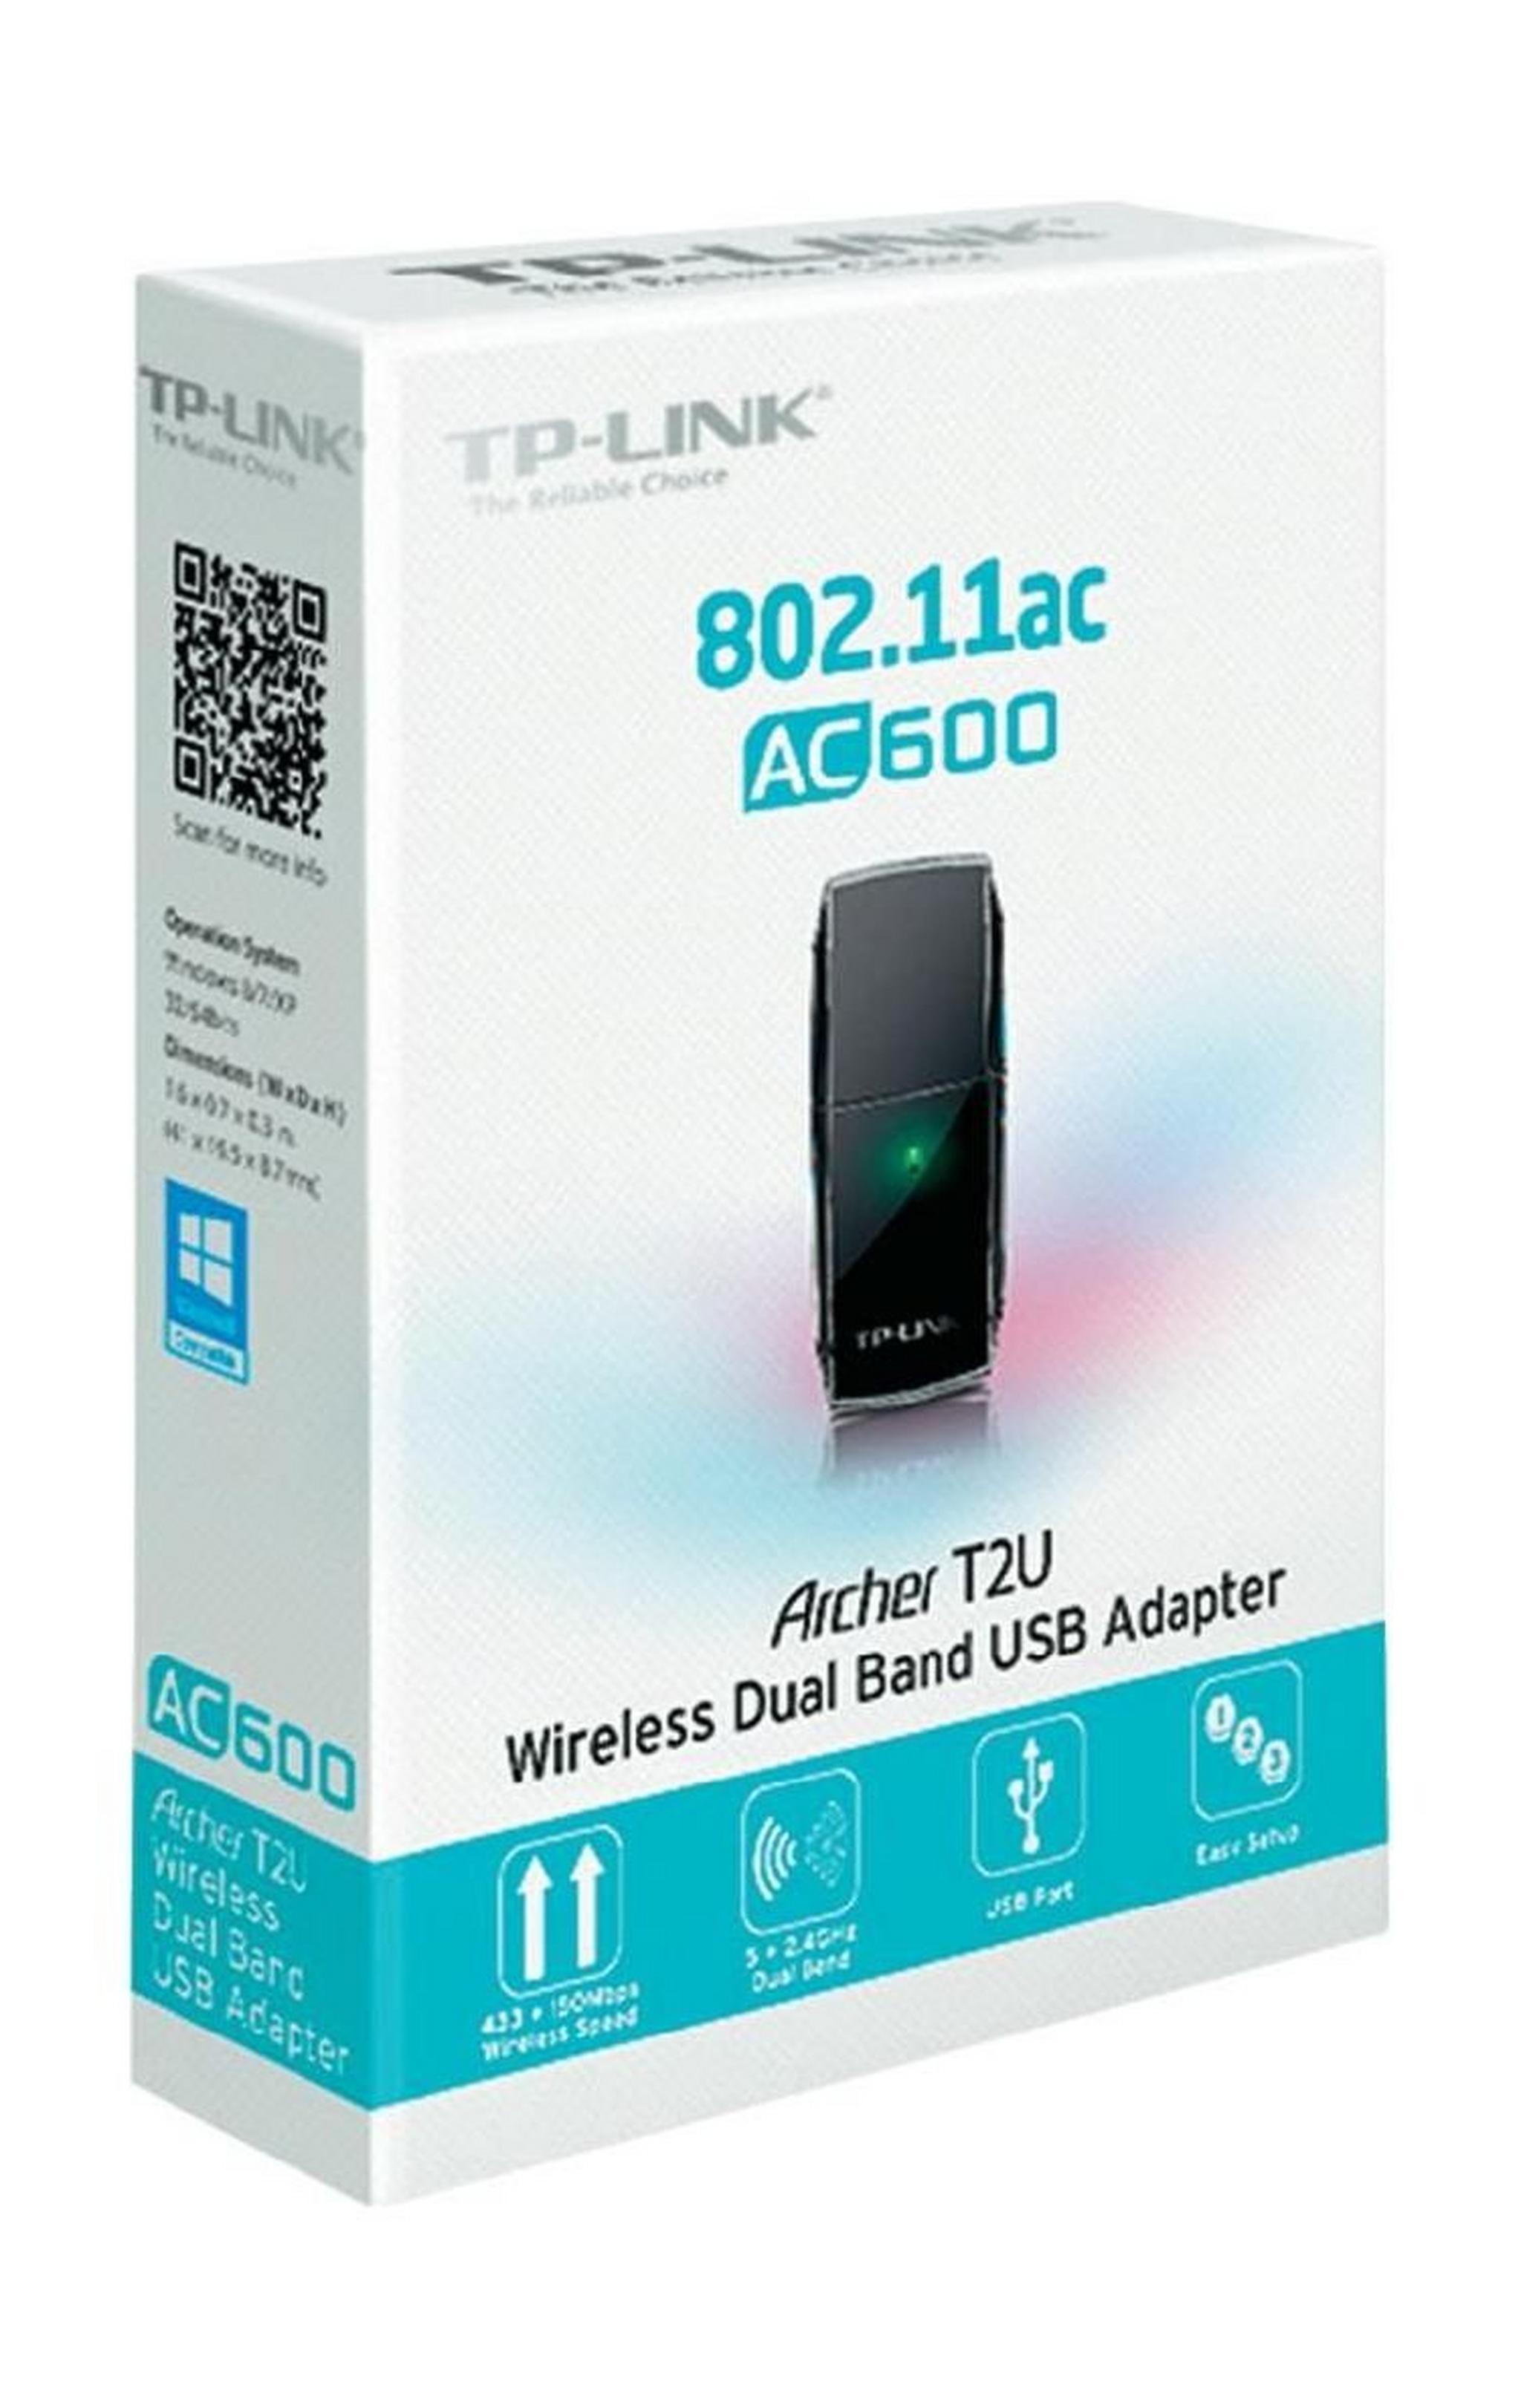 TP-Link Archer T2U AC600 Wireless Dual Band USB Adapter - 433 Mbps